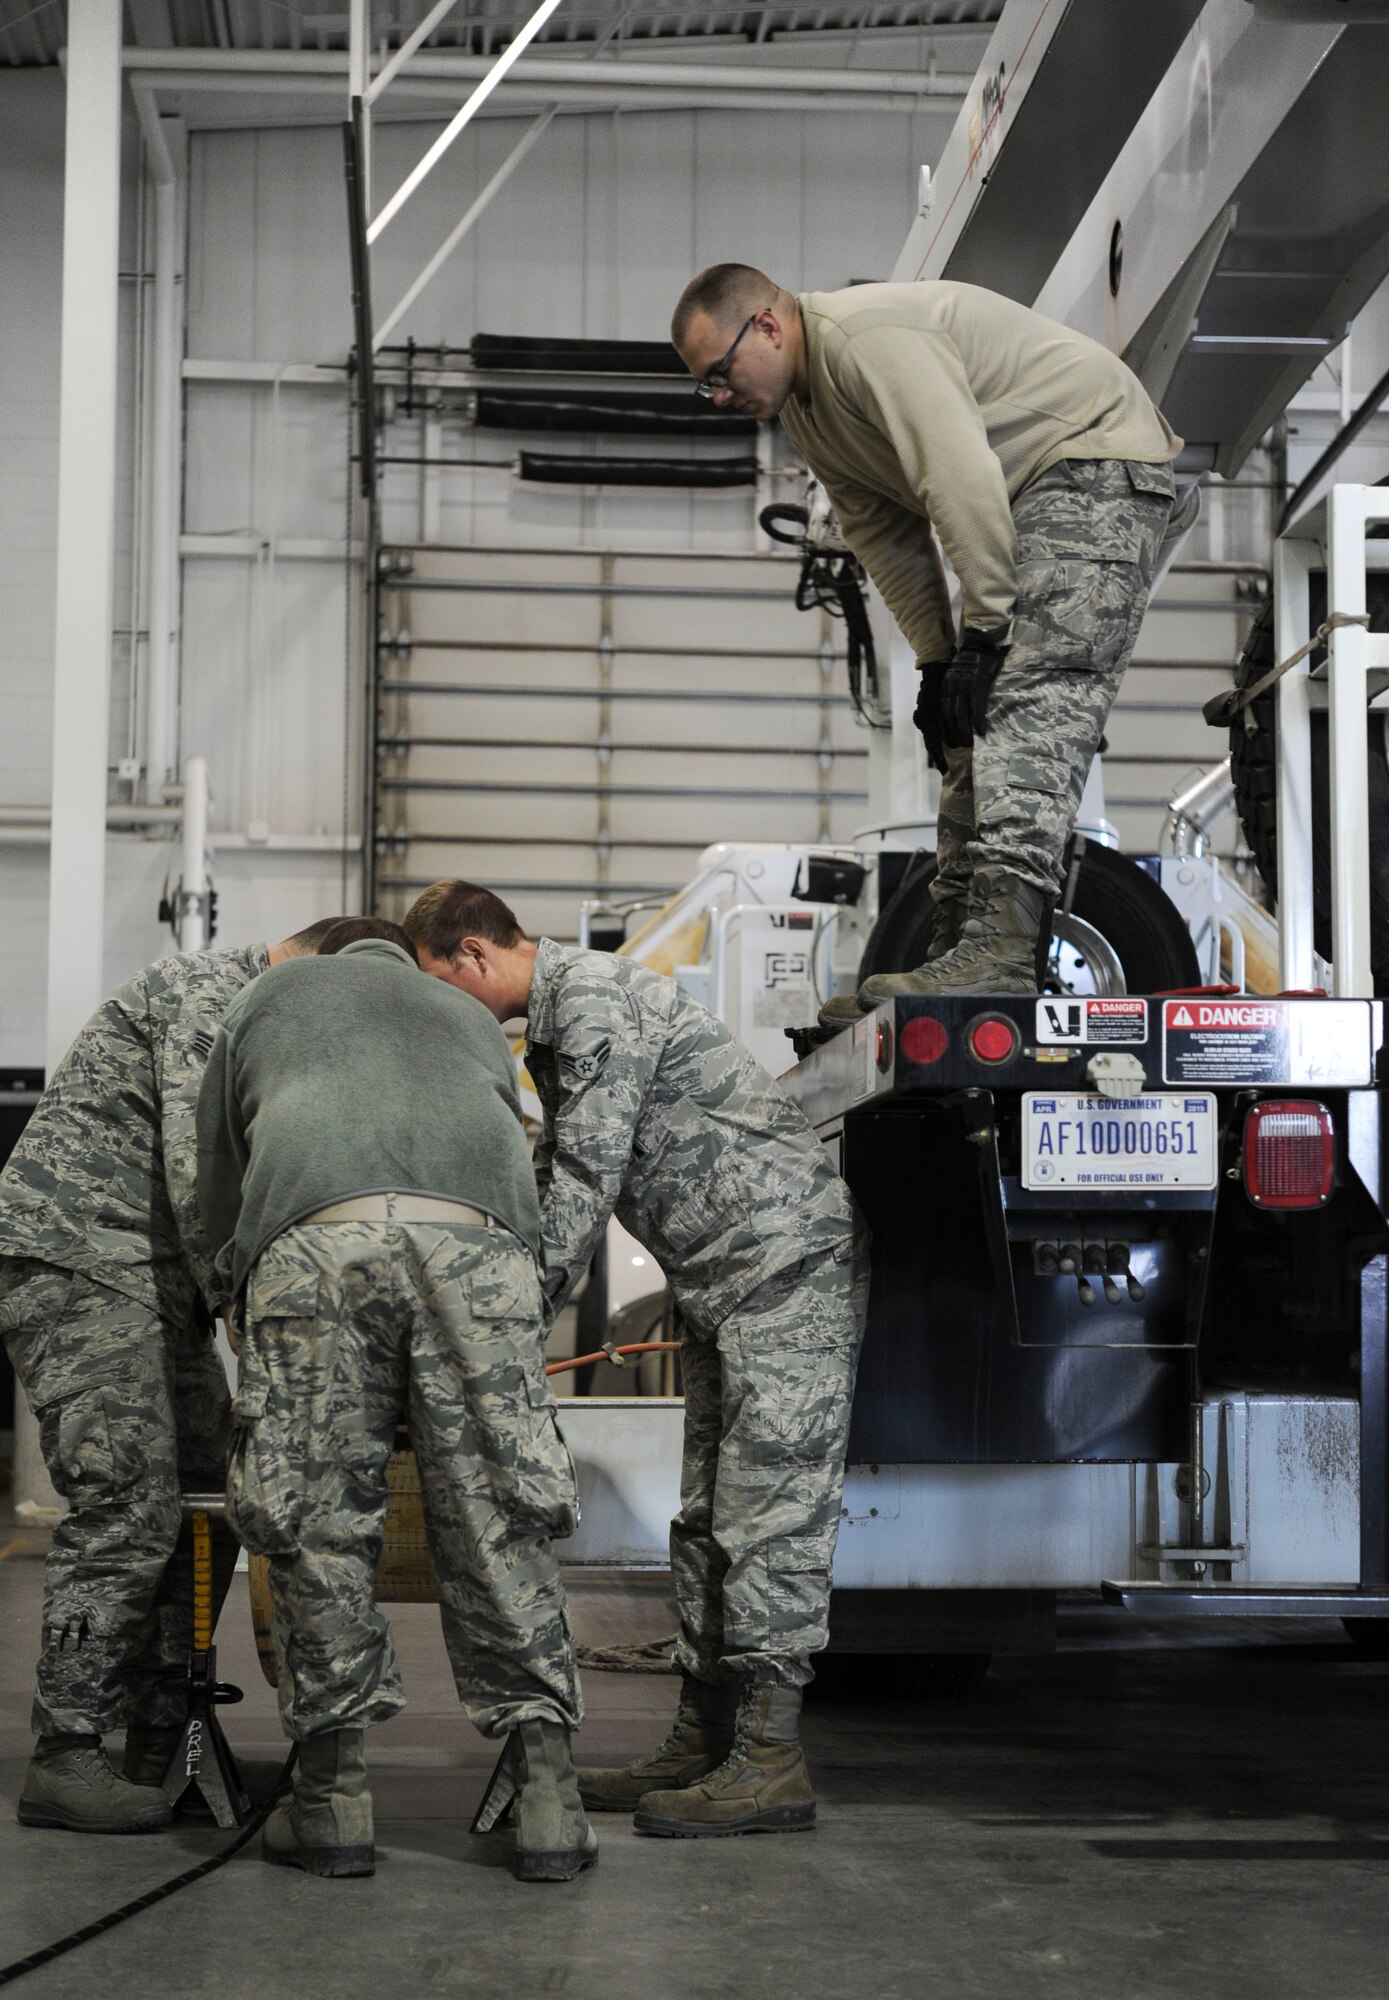 A group of 91st Missile Operations Squadron mechanical and pneudraulics section team members position stabilizers during maintenance on a crane on Minot Air Force Base, N.D. Oct. 30, 2014. Stabalizers ensure  the large piece of equipment is unable to shift during maintenance. (U.S. Air Force photo/Senior Airman Stephanie Morris)